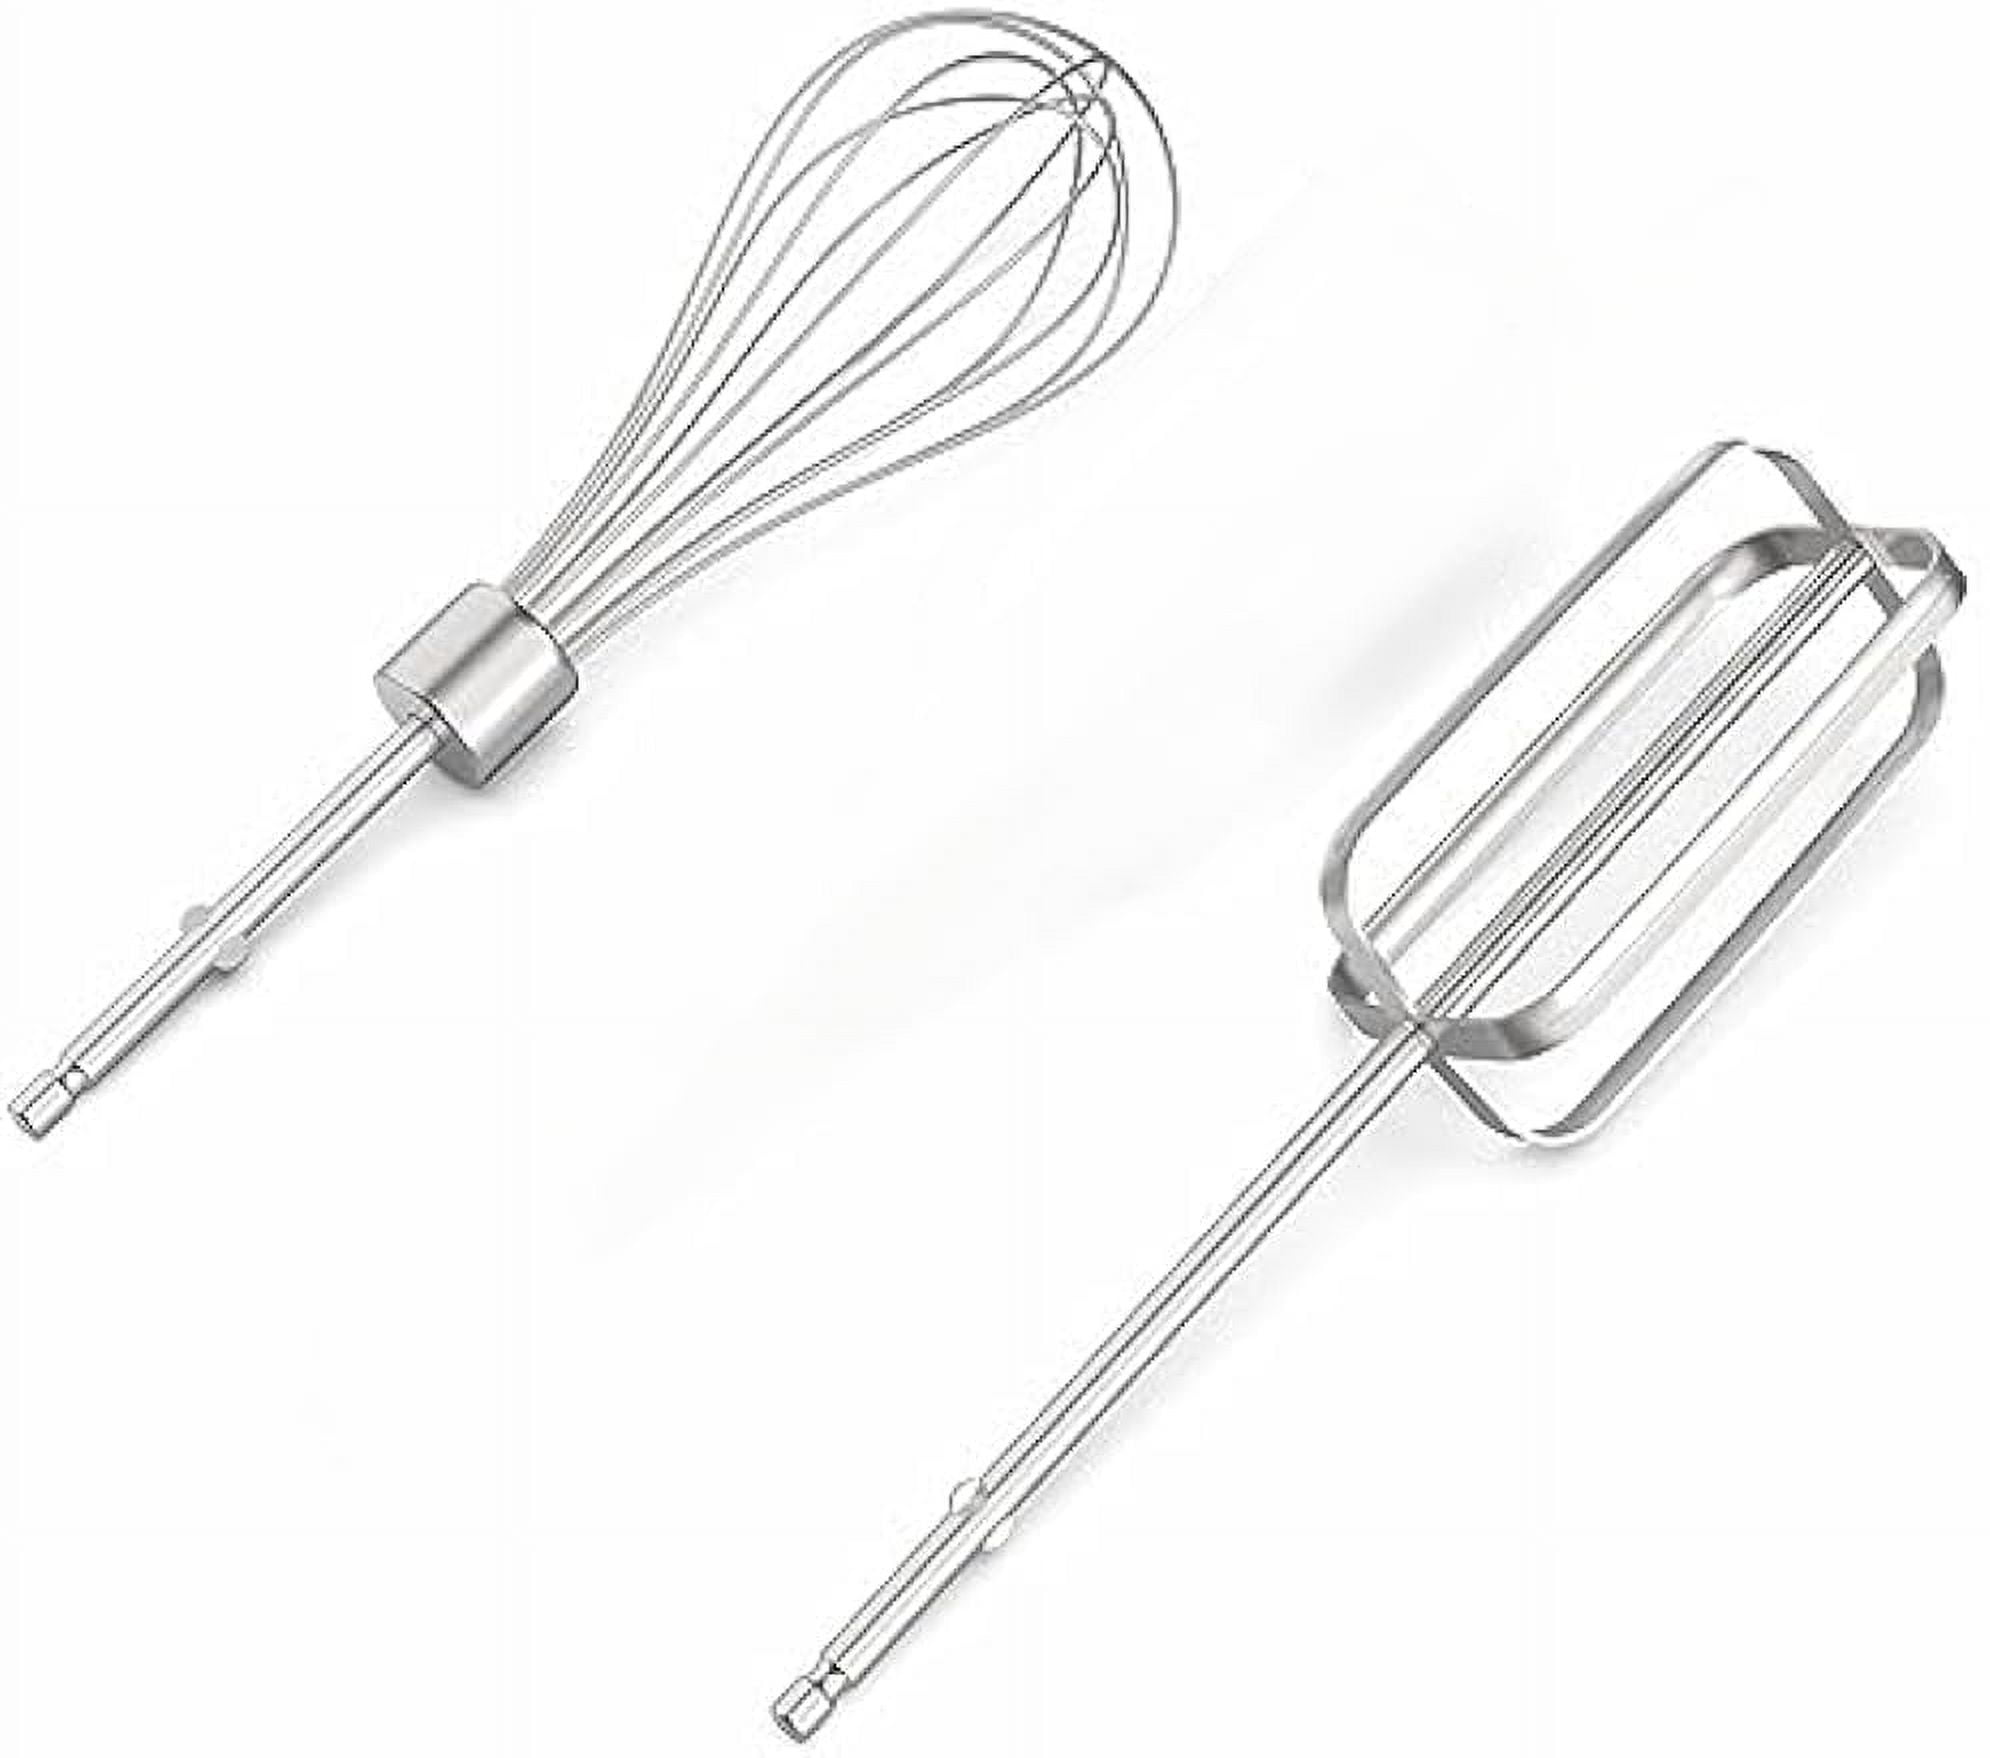 The Best Hand Mixer Replacement Beaters